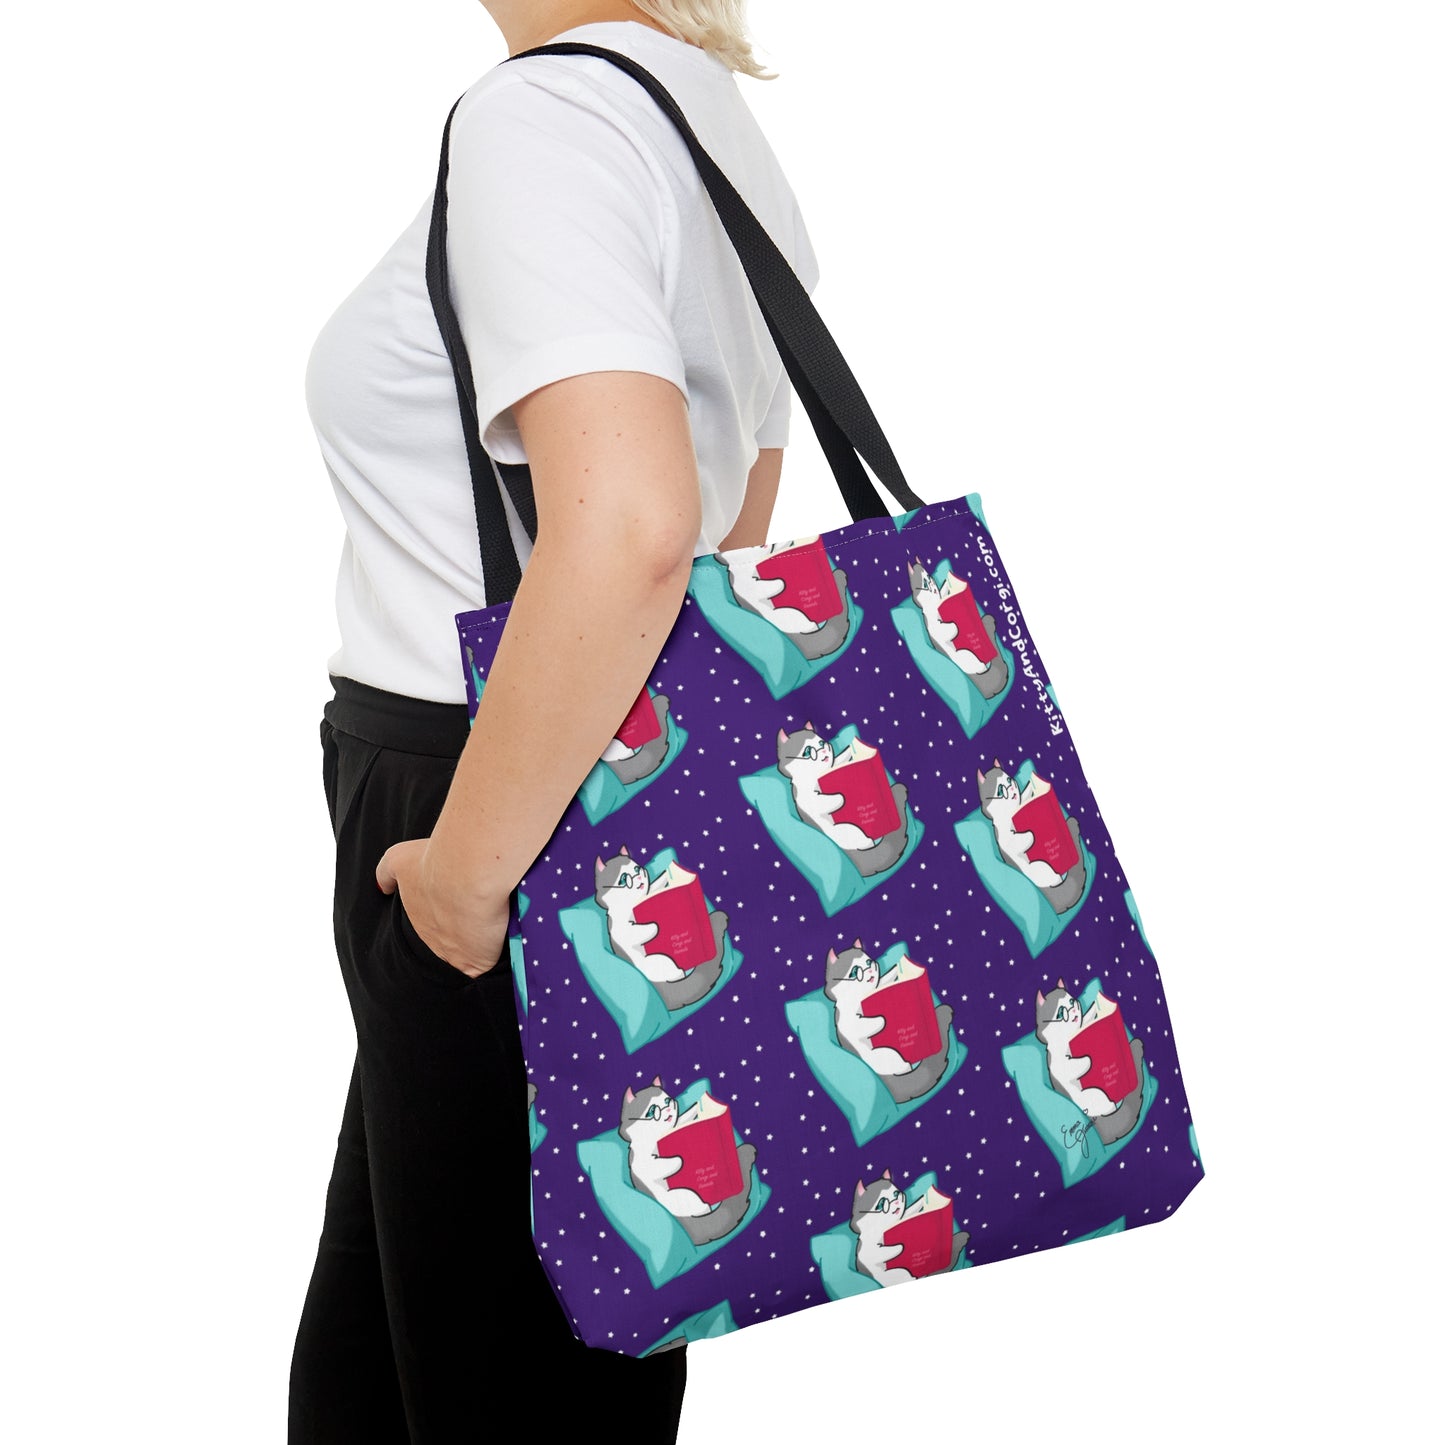 Kitty Reading a Book - Repeating Pattern in Dark Purple - Tote Bag (AOP)